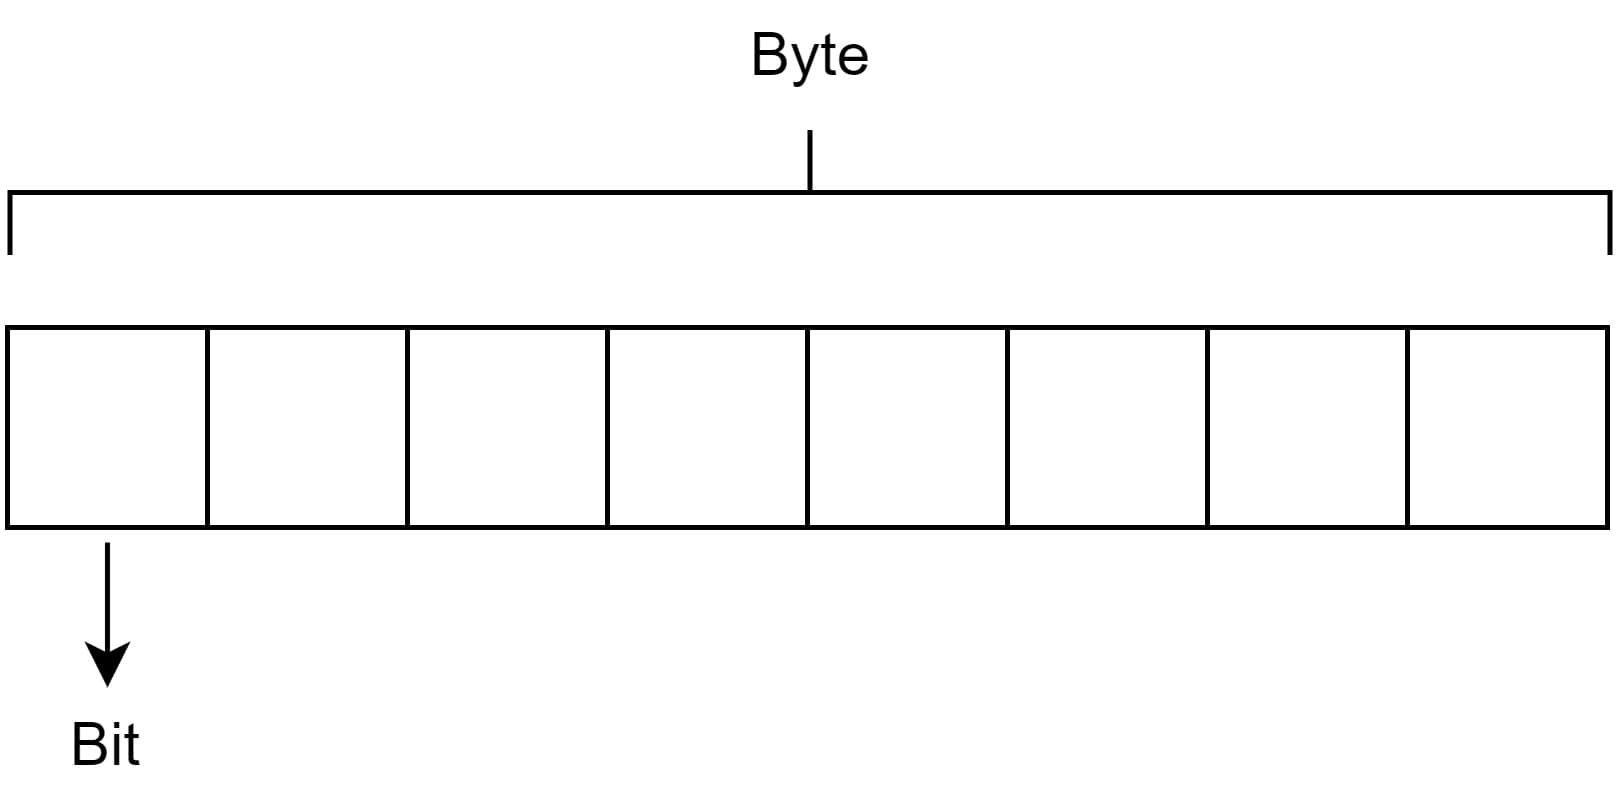 Graphical comparison between bit and byte